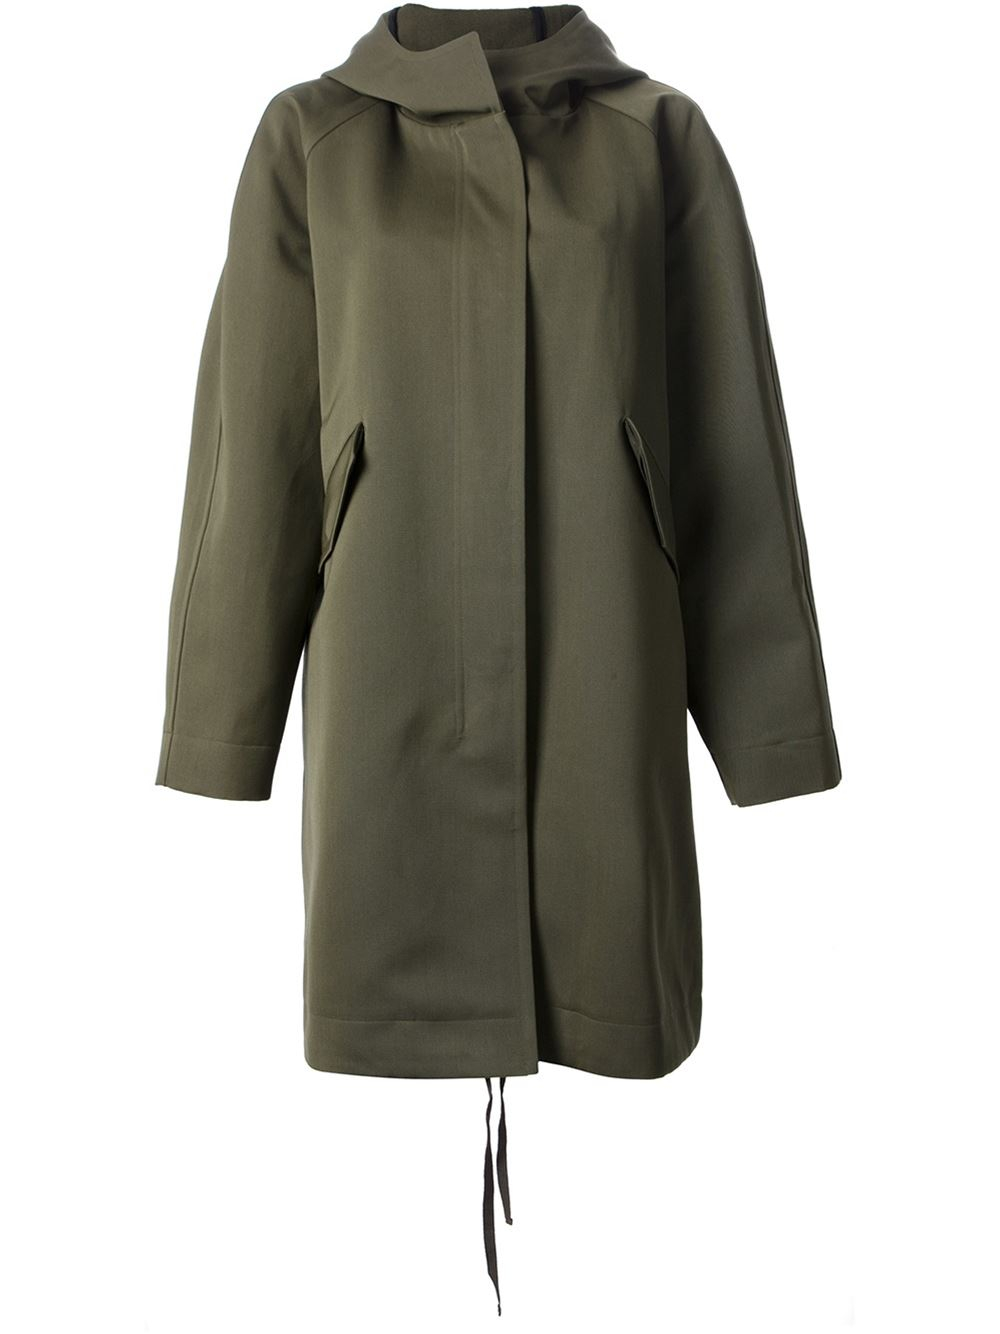 Lyst - Sofie d'hoore Oversize Hooded Parka in Green